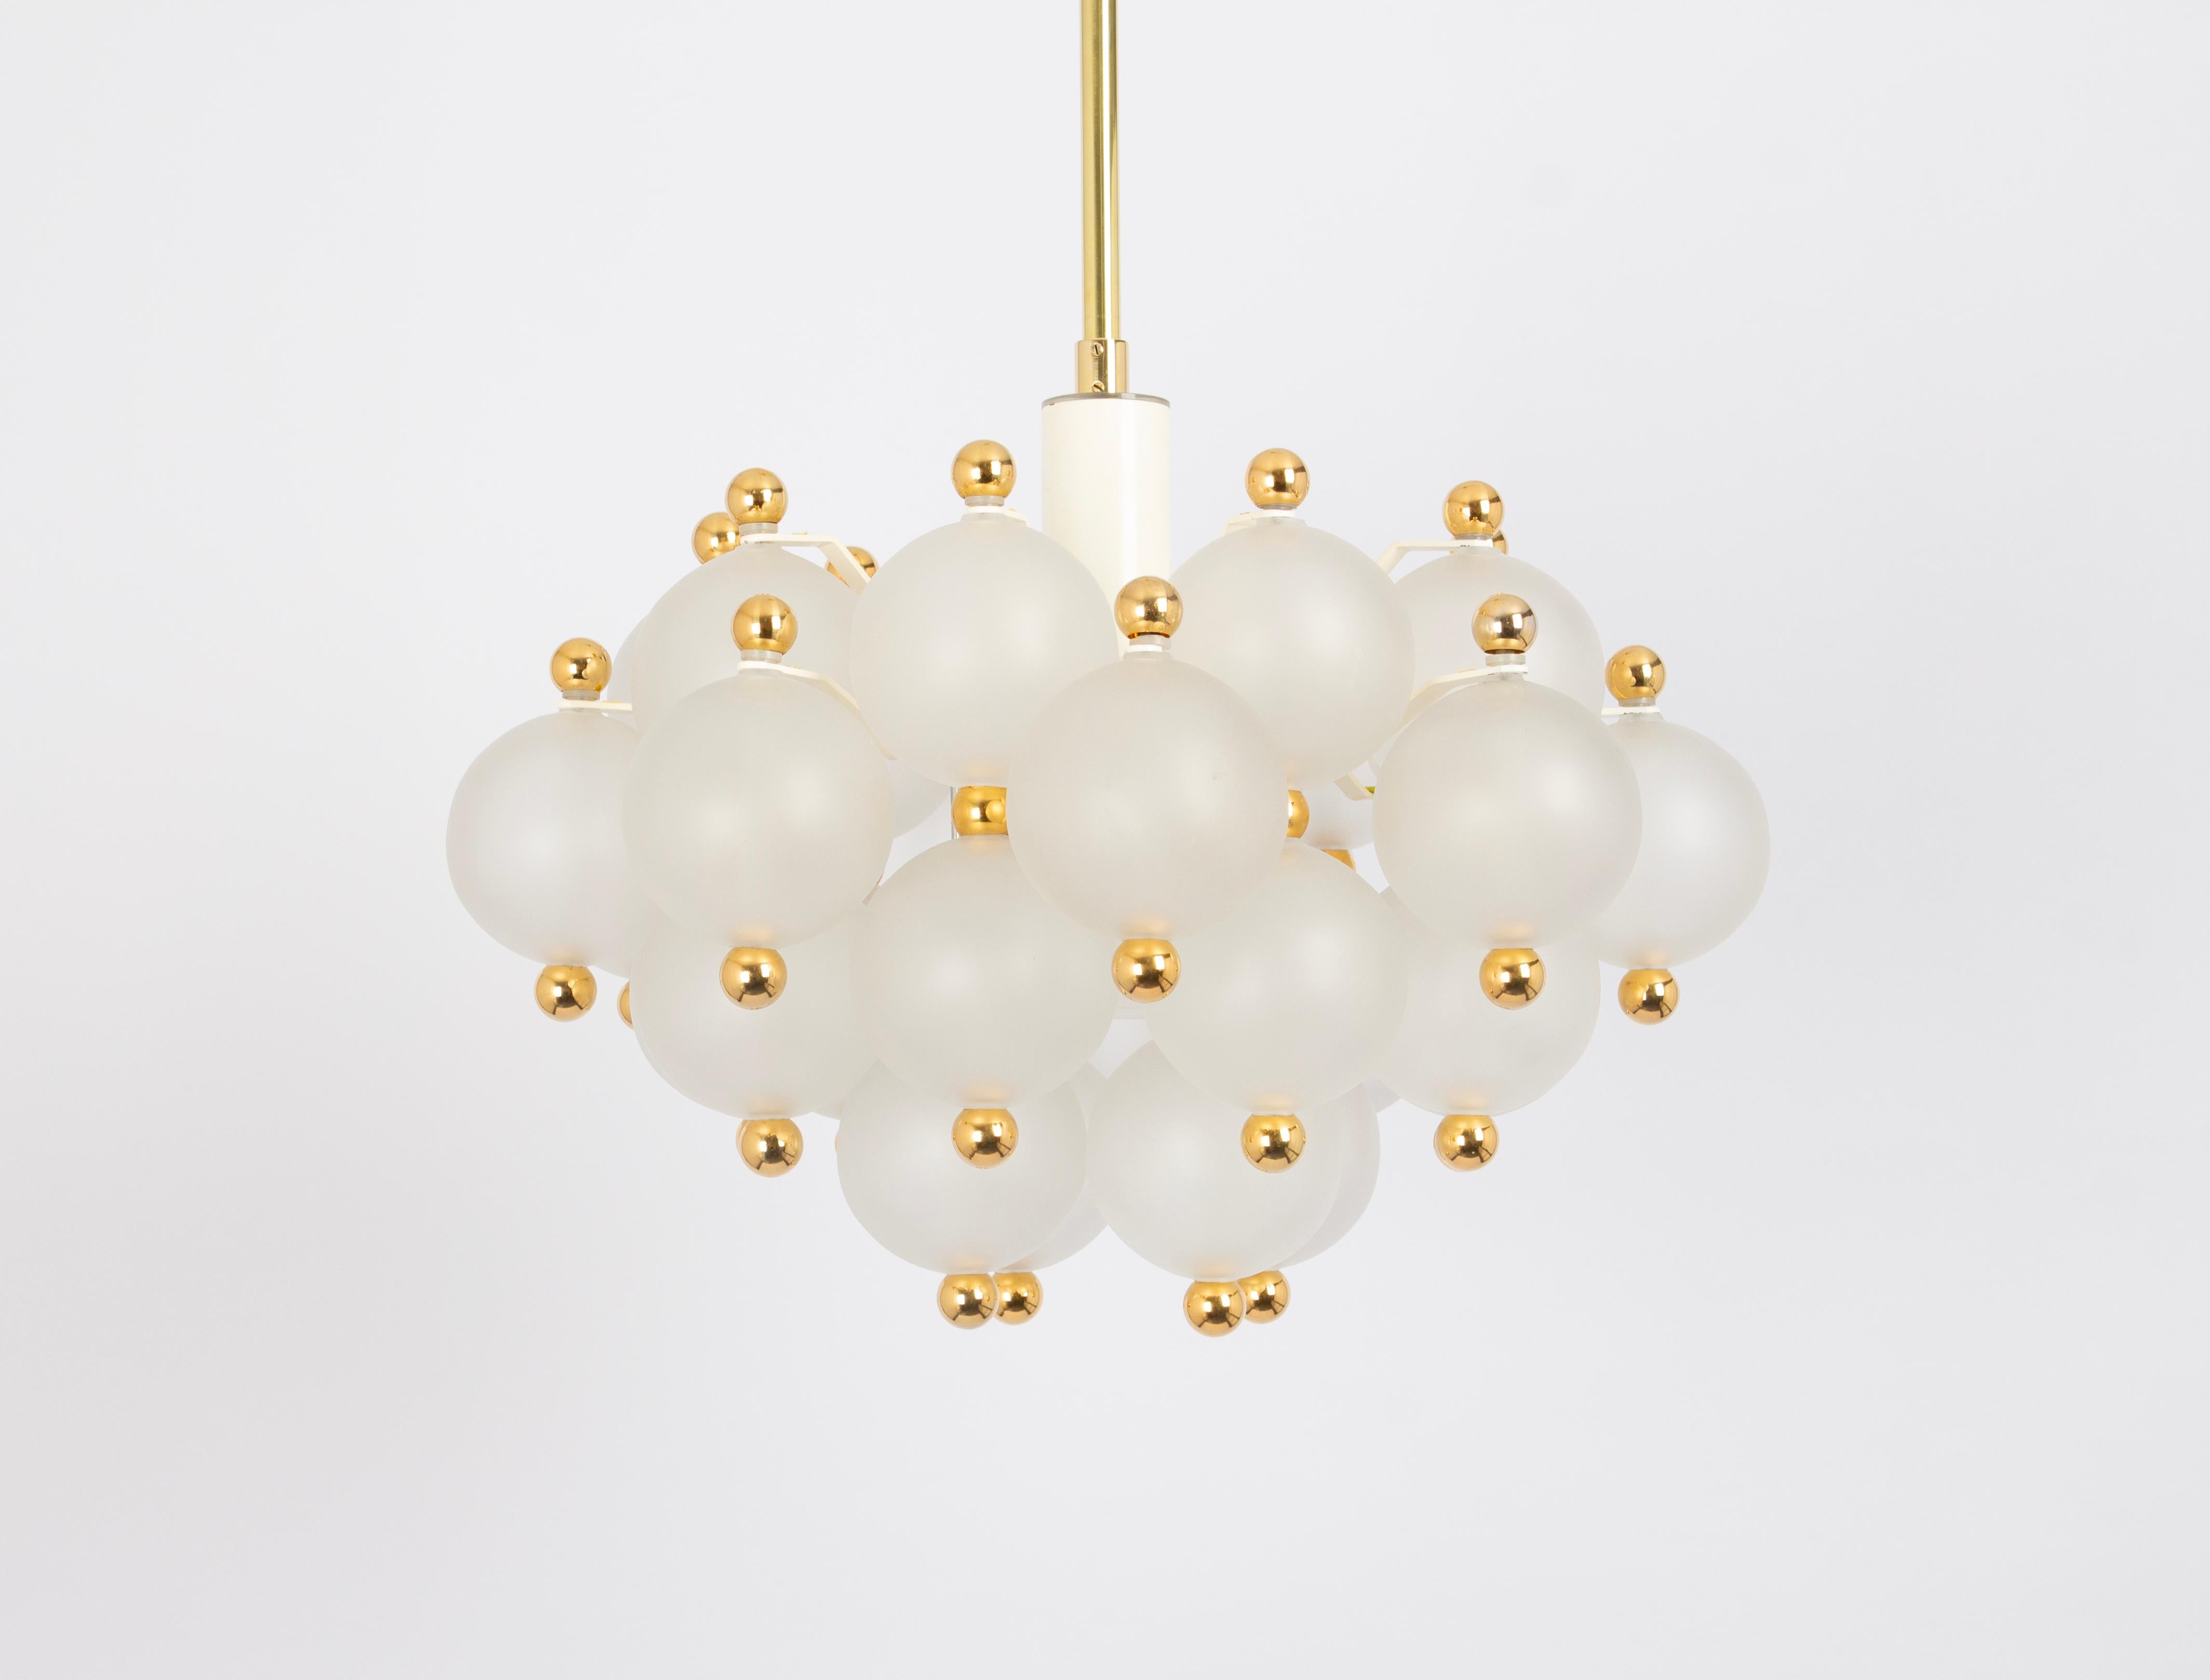 A stunning frosted glass and brass chandelier by Kinkeldey, Germany, 1970s

Sockets: One x E27/E26 standard bulb (up to 100 Watt)
Light bulbs are not included. It is possible to install this fixture in all countries (US, UK, Europe, Asia,